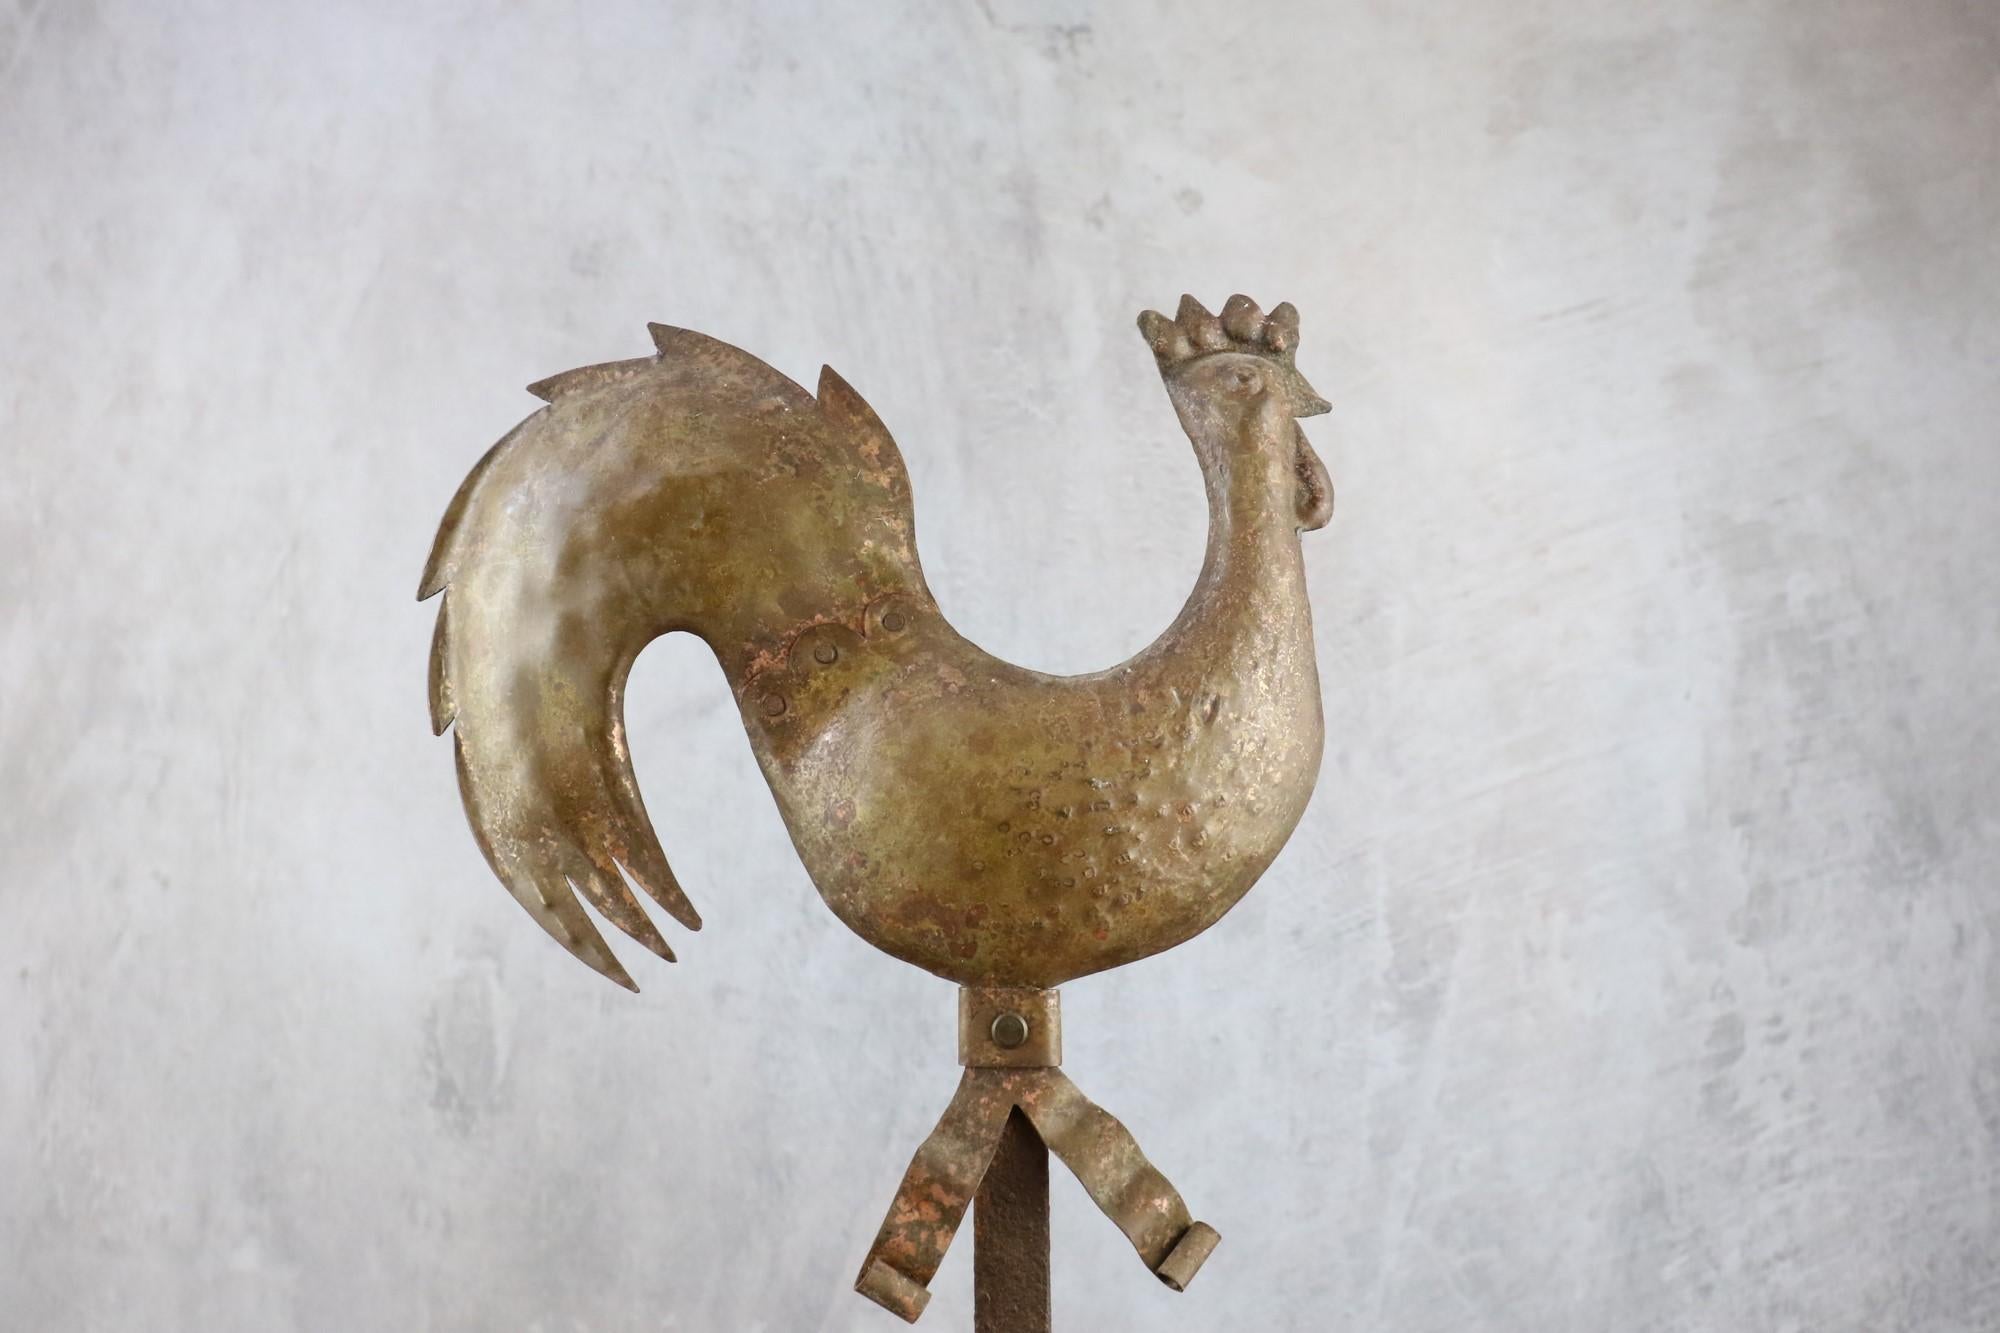 Wall lights in hammered iron with rooster decoration, 1940-1950, France

Superb hammered-iron sconces, nicely patinated, with rooster decoration in the style of the work of Jean Touret, Ateliers Marolles.  
The lights imitate candlesticks. 
Their